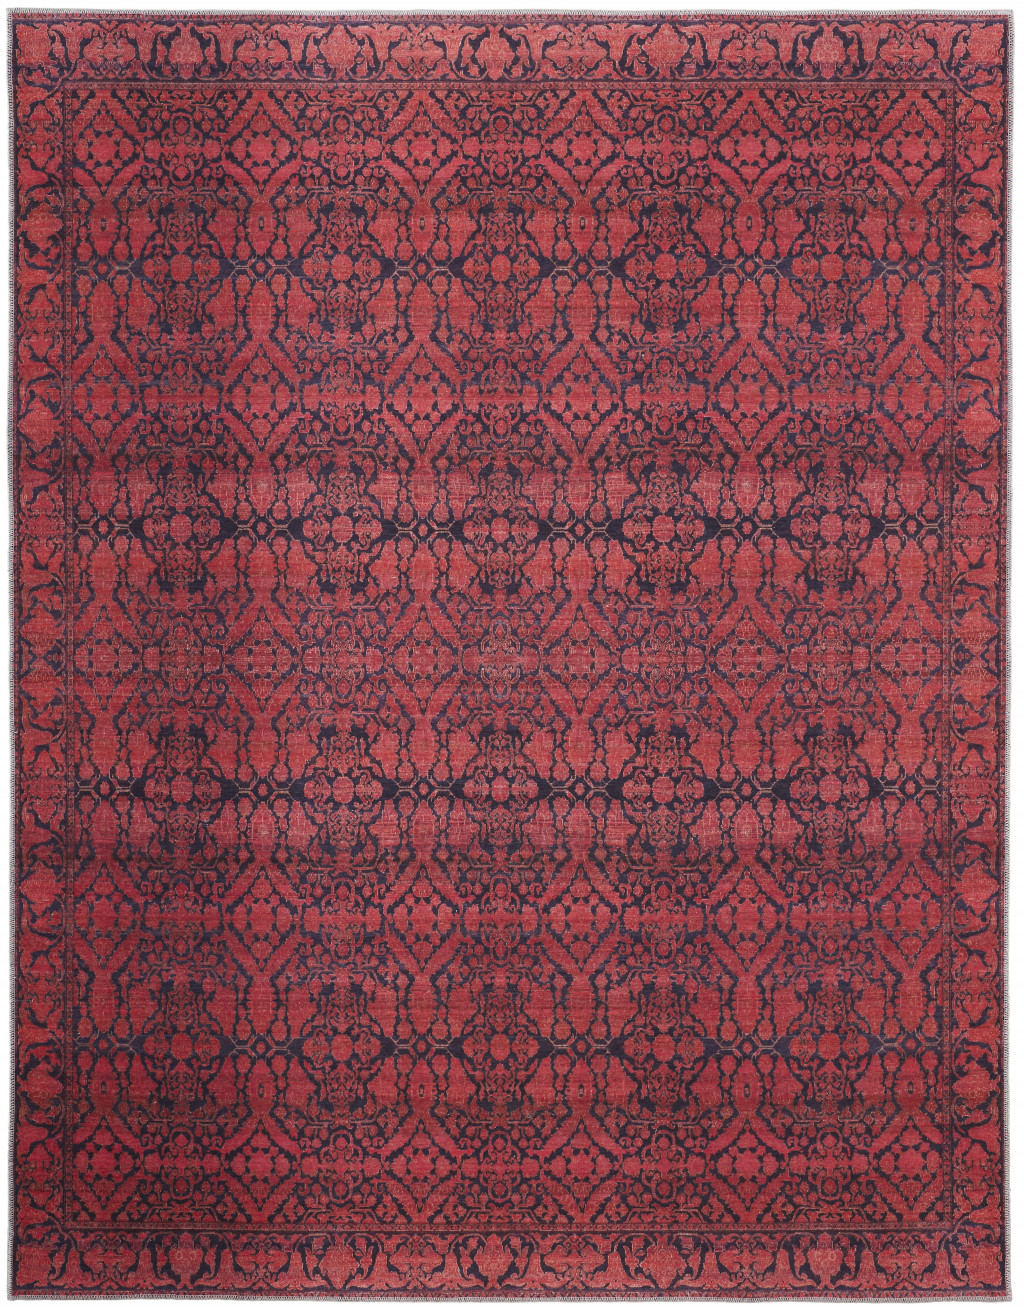 5' X 8' Red And Black Floral Power Loom Area Rug-515197-1